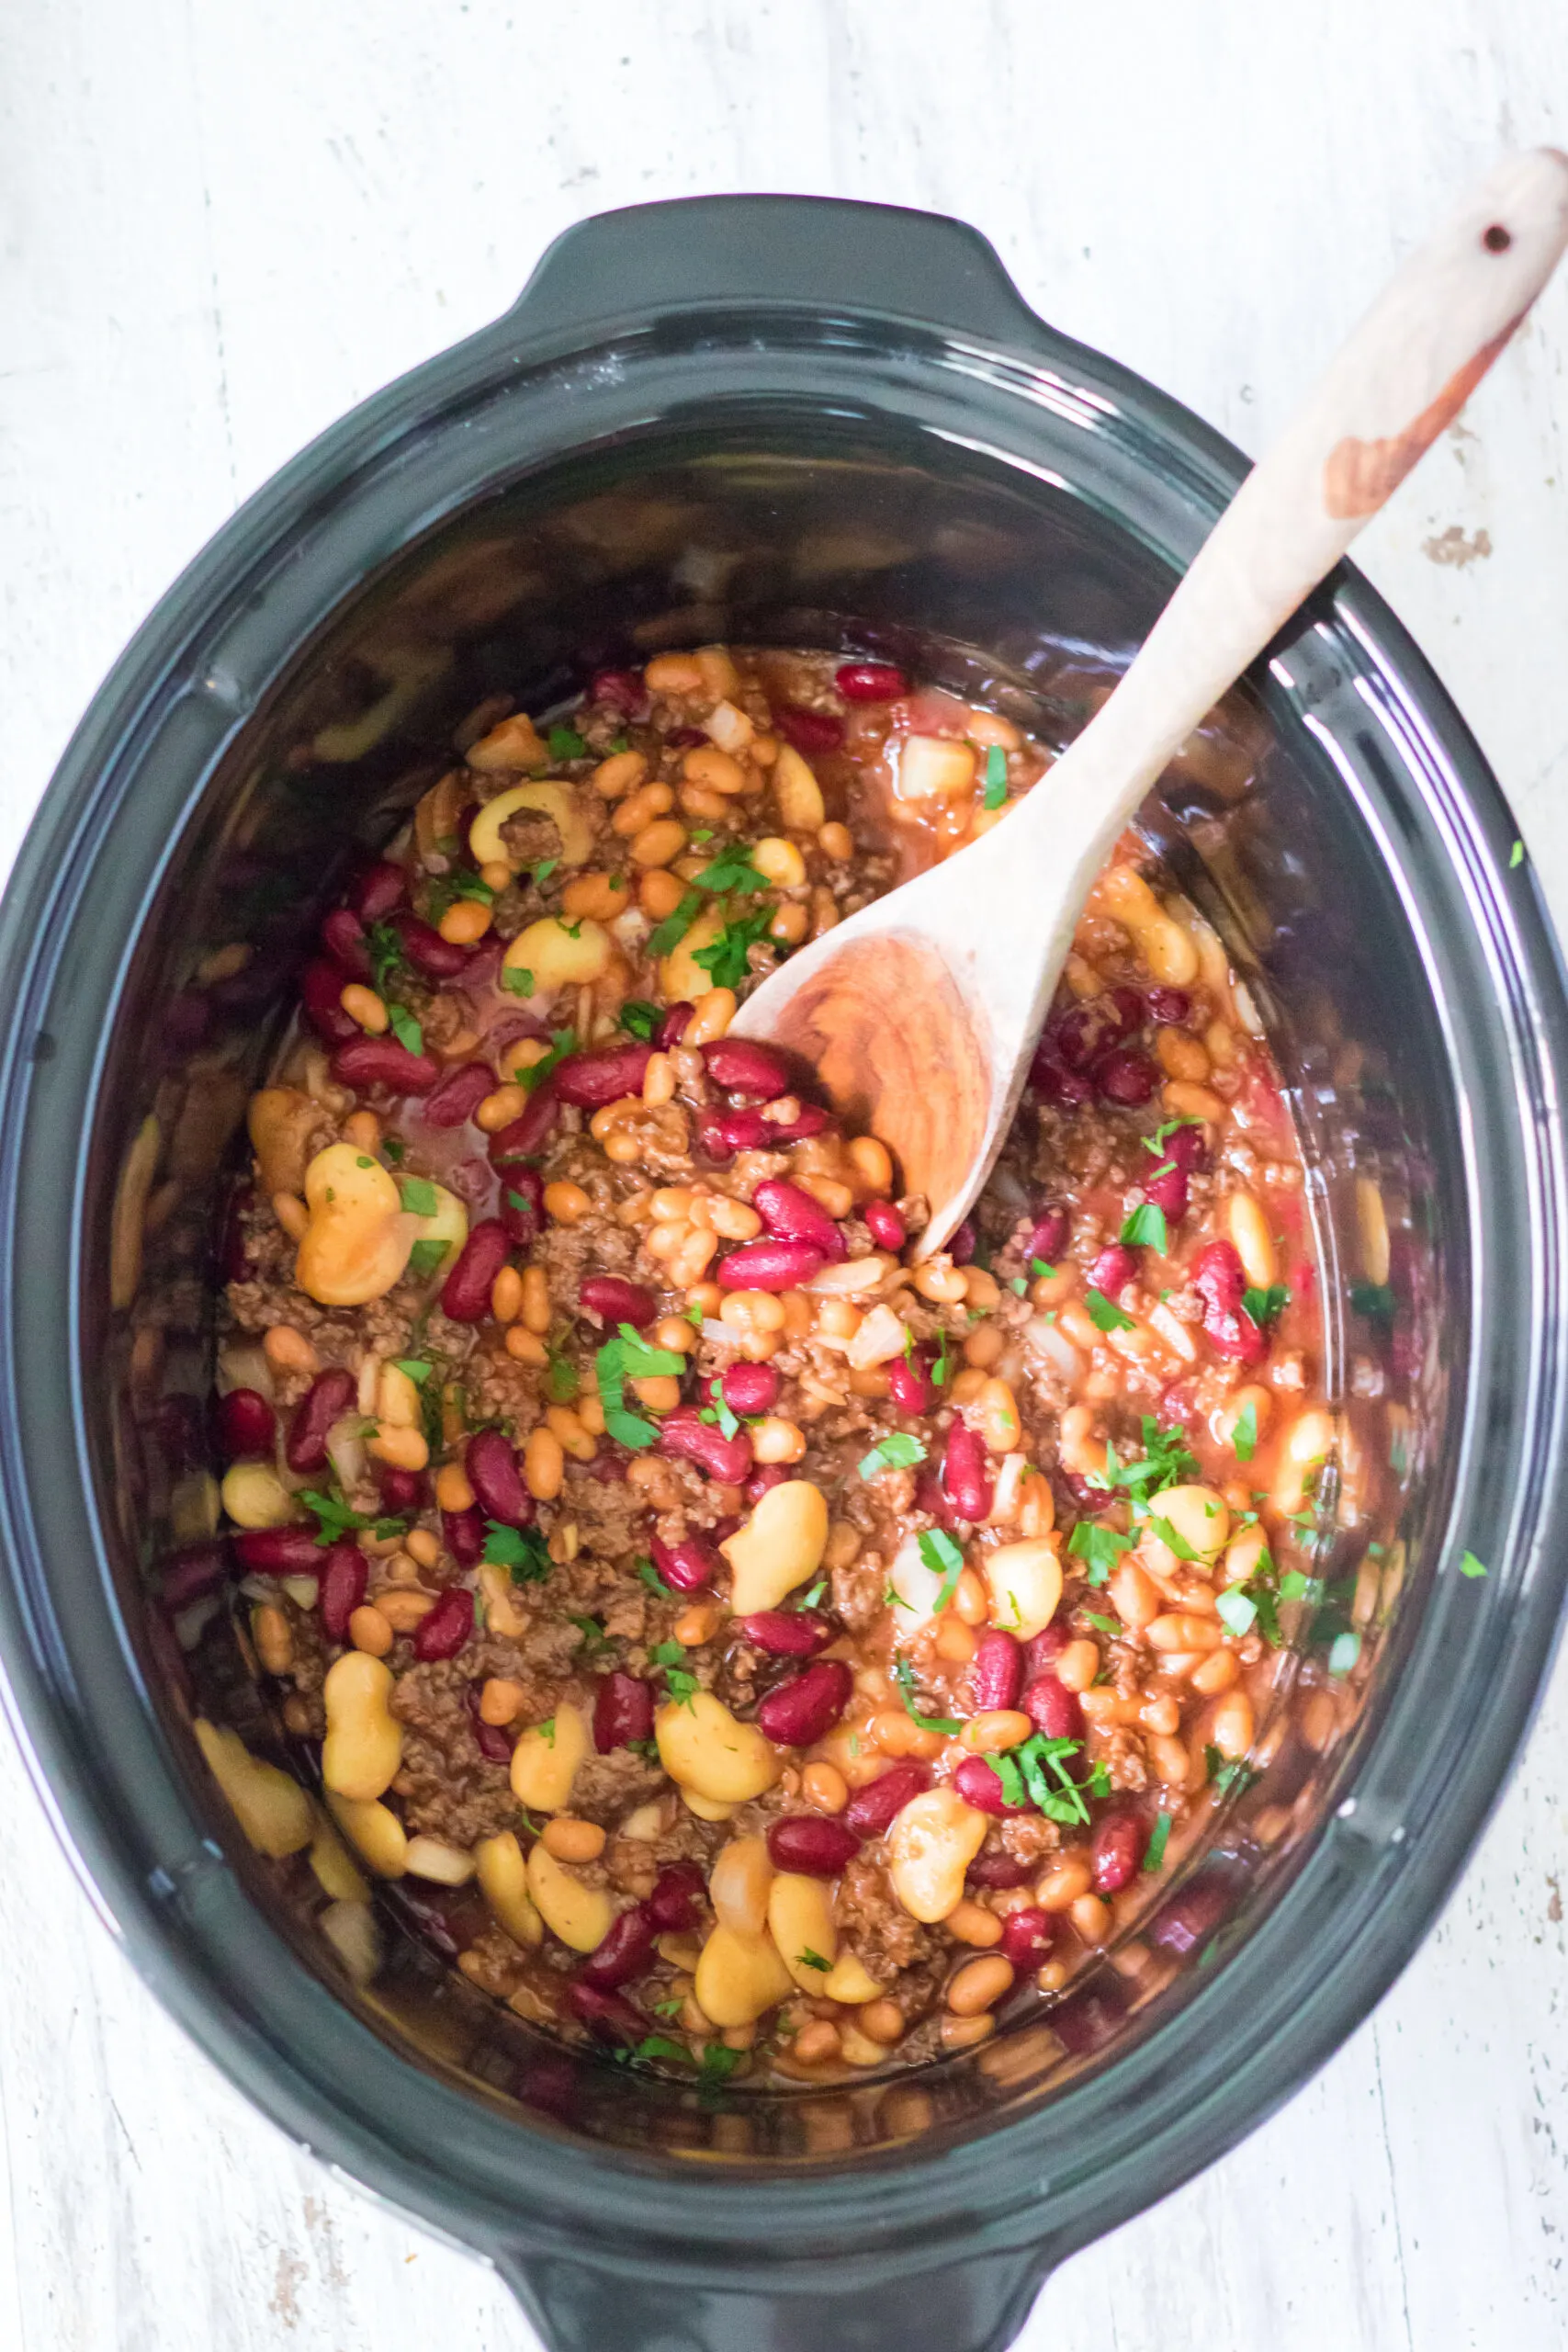 Perfect for summer potlucks or a cozy meal when the weather is chilly, this slow cooker beefy baked beans recipe is an easy 4-season meal that's always a crowd-pleaser. via @Mooreorlesscook